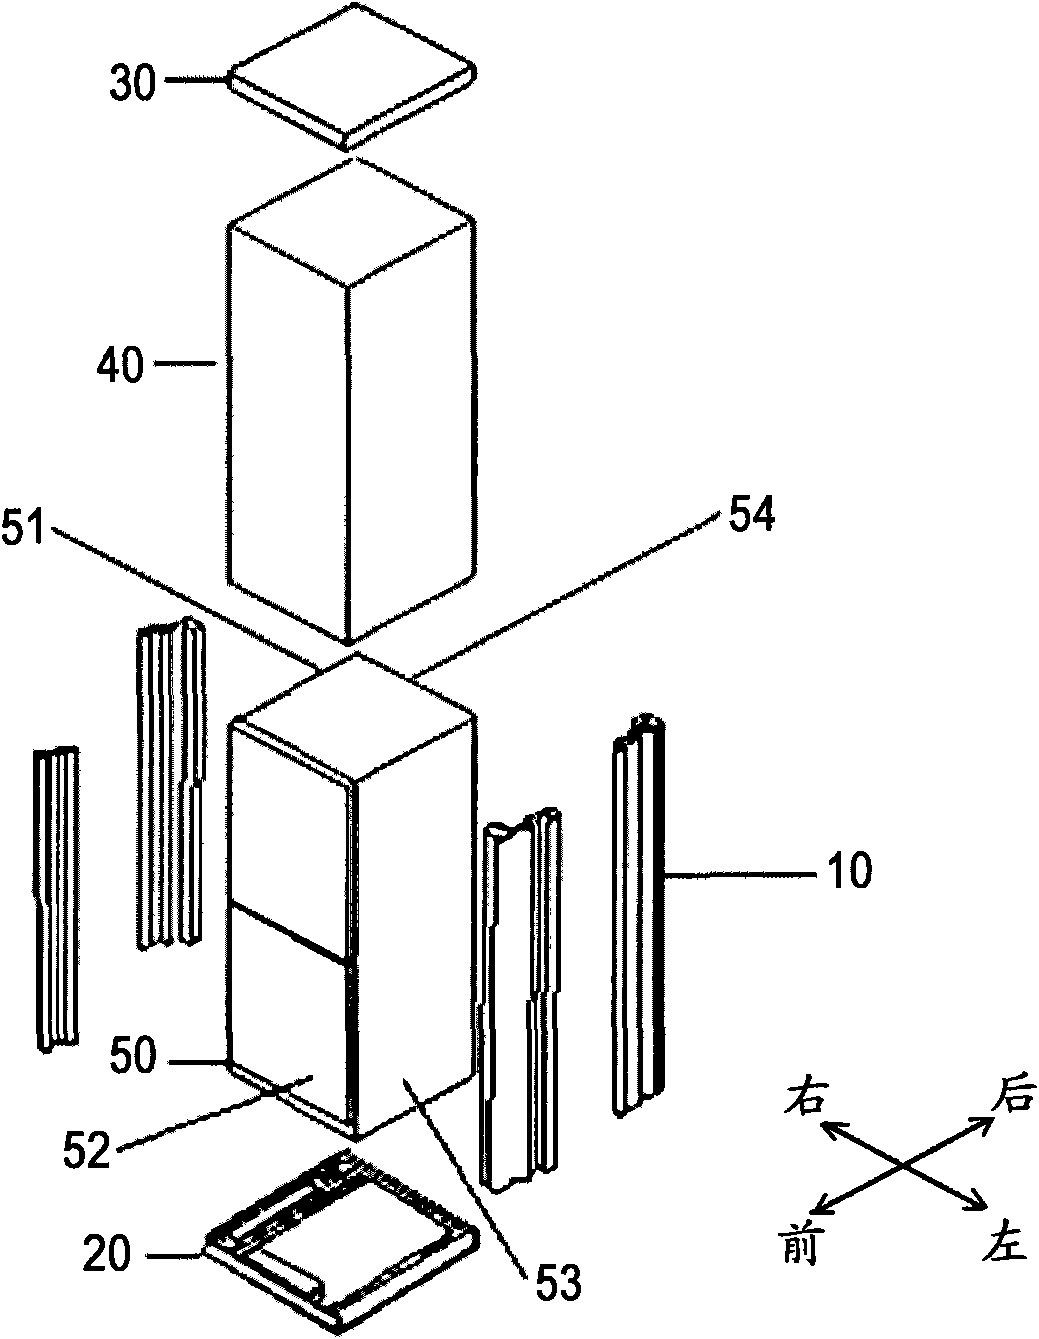 Package angle bead, base and package structure provided with same